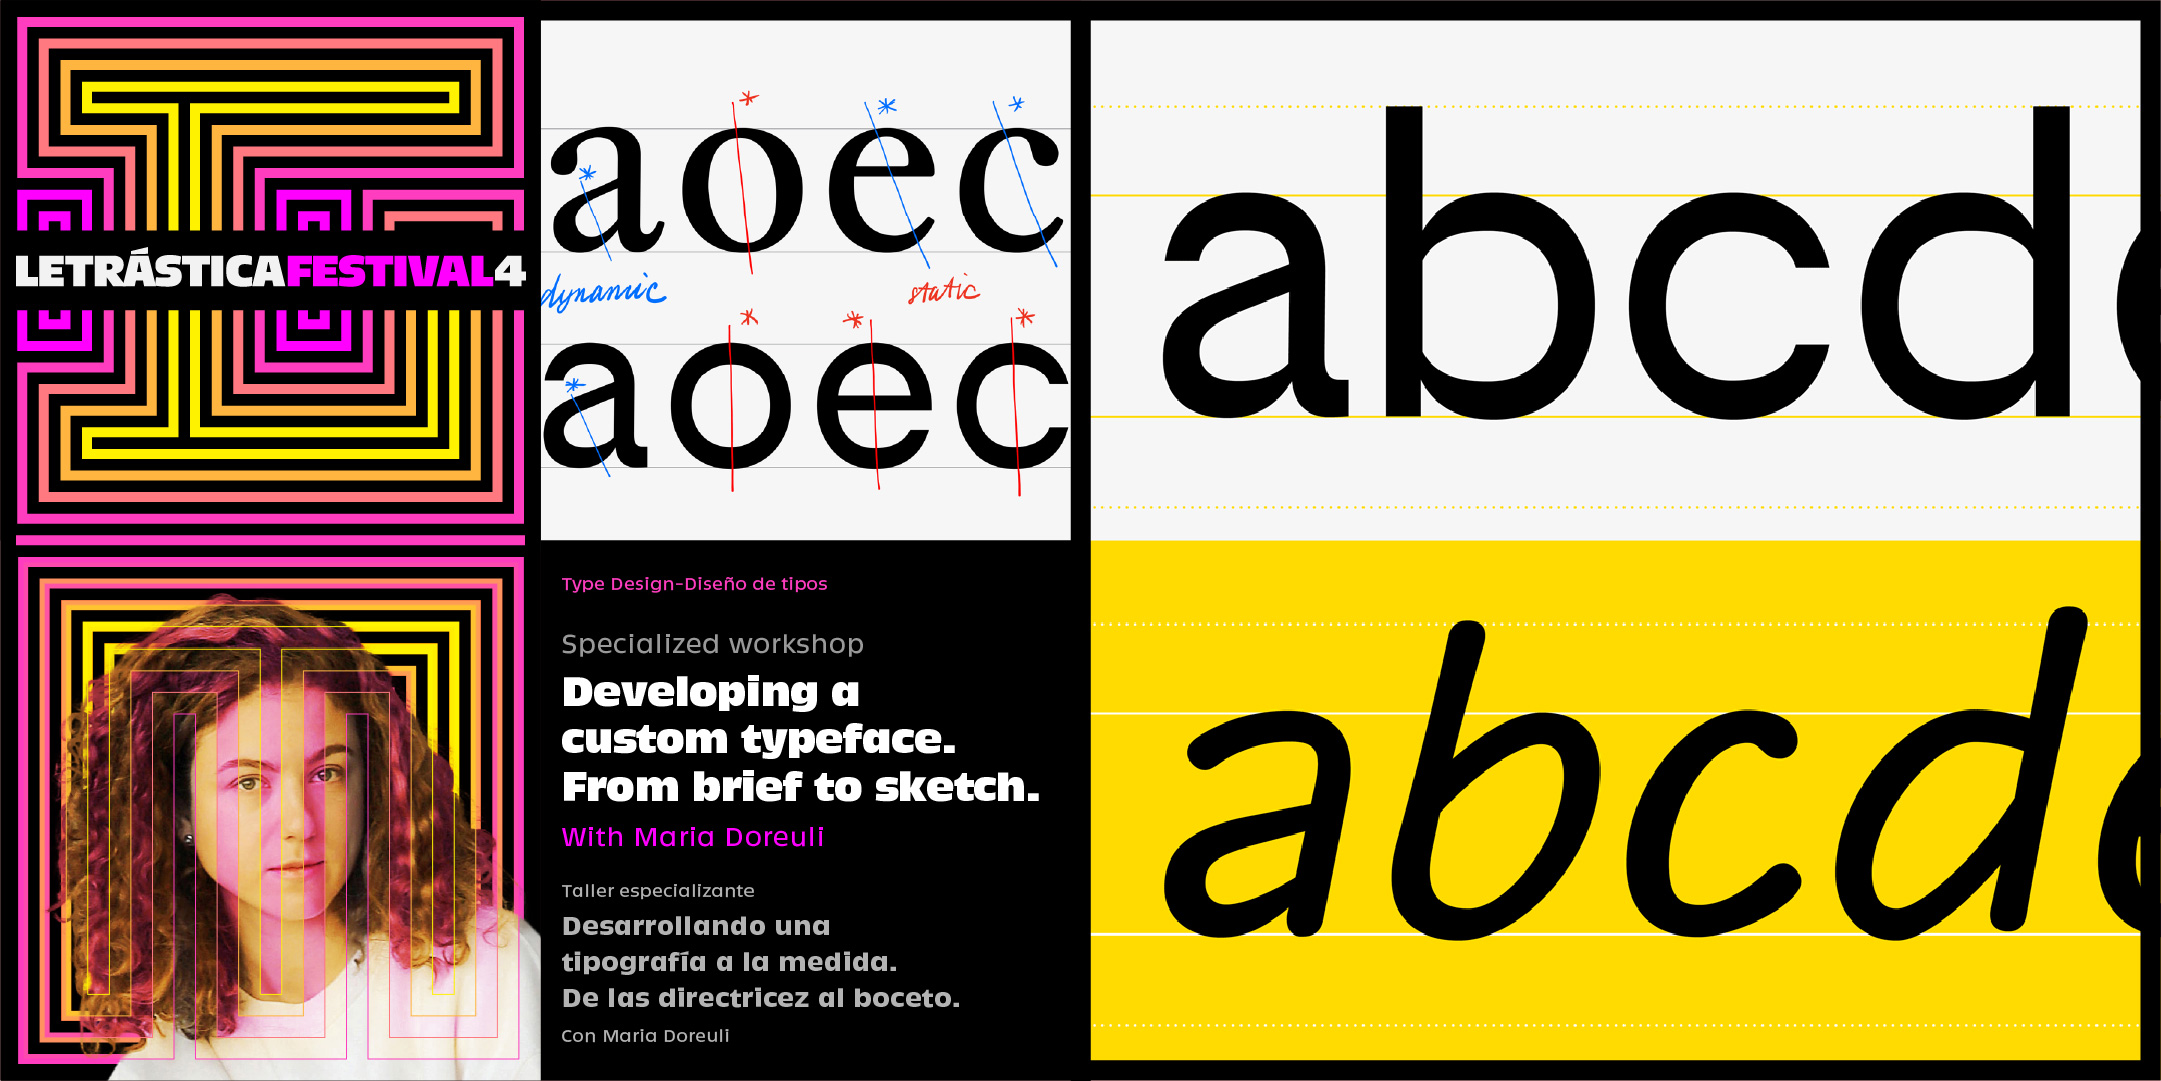 Developing a custom typeface. From brief to sketch.